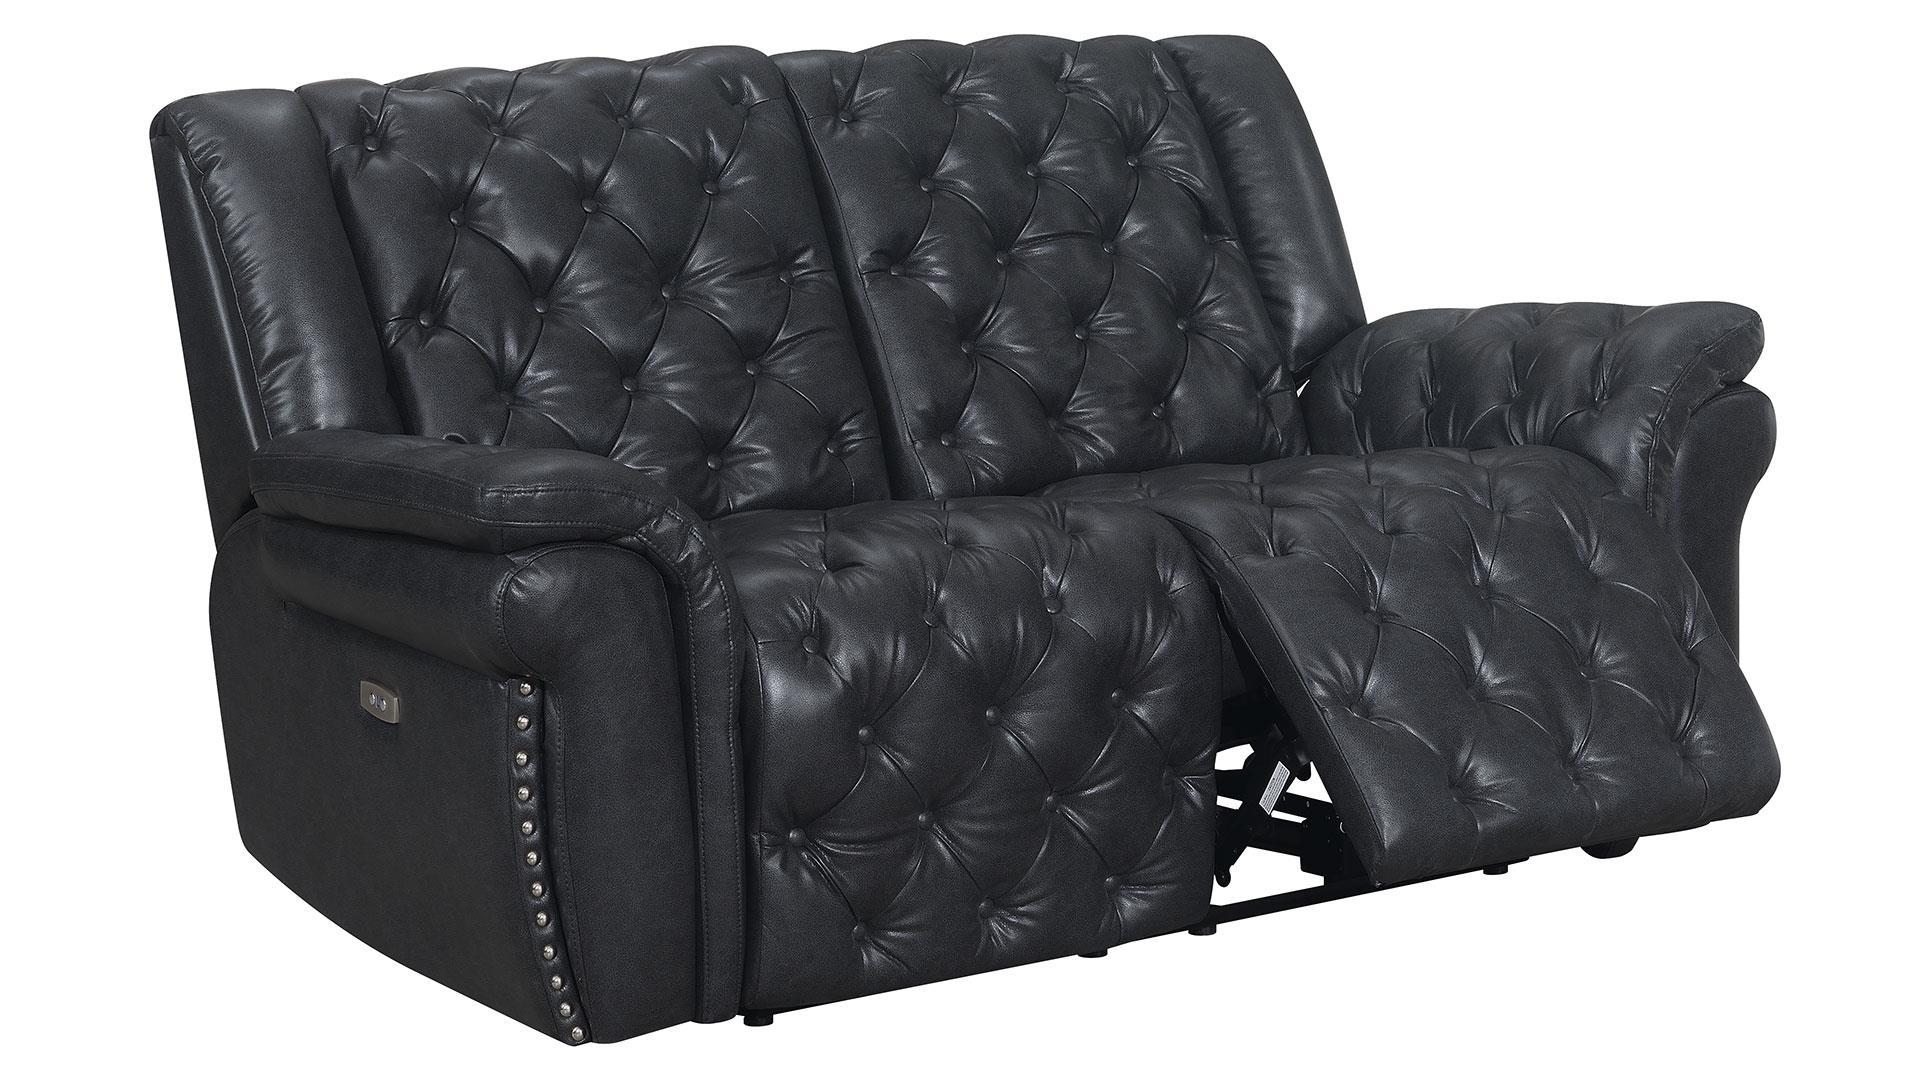 Transitional Power Reclining Loveseat EVELYN BLANCHE CHARCOAL EVELYN-DTP932-7-PRLS in Charcoal Leather Air/Match